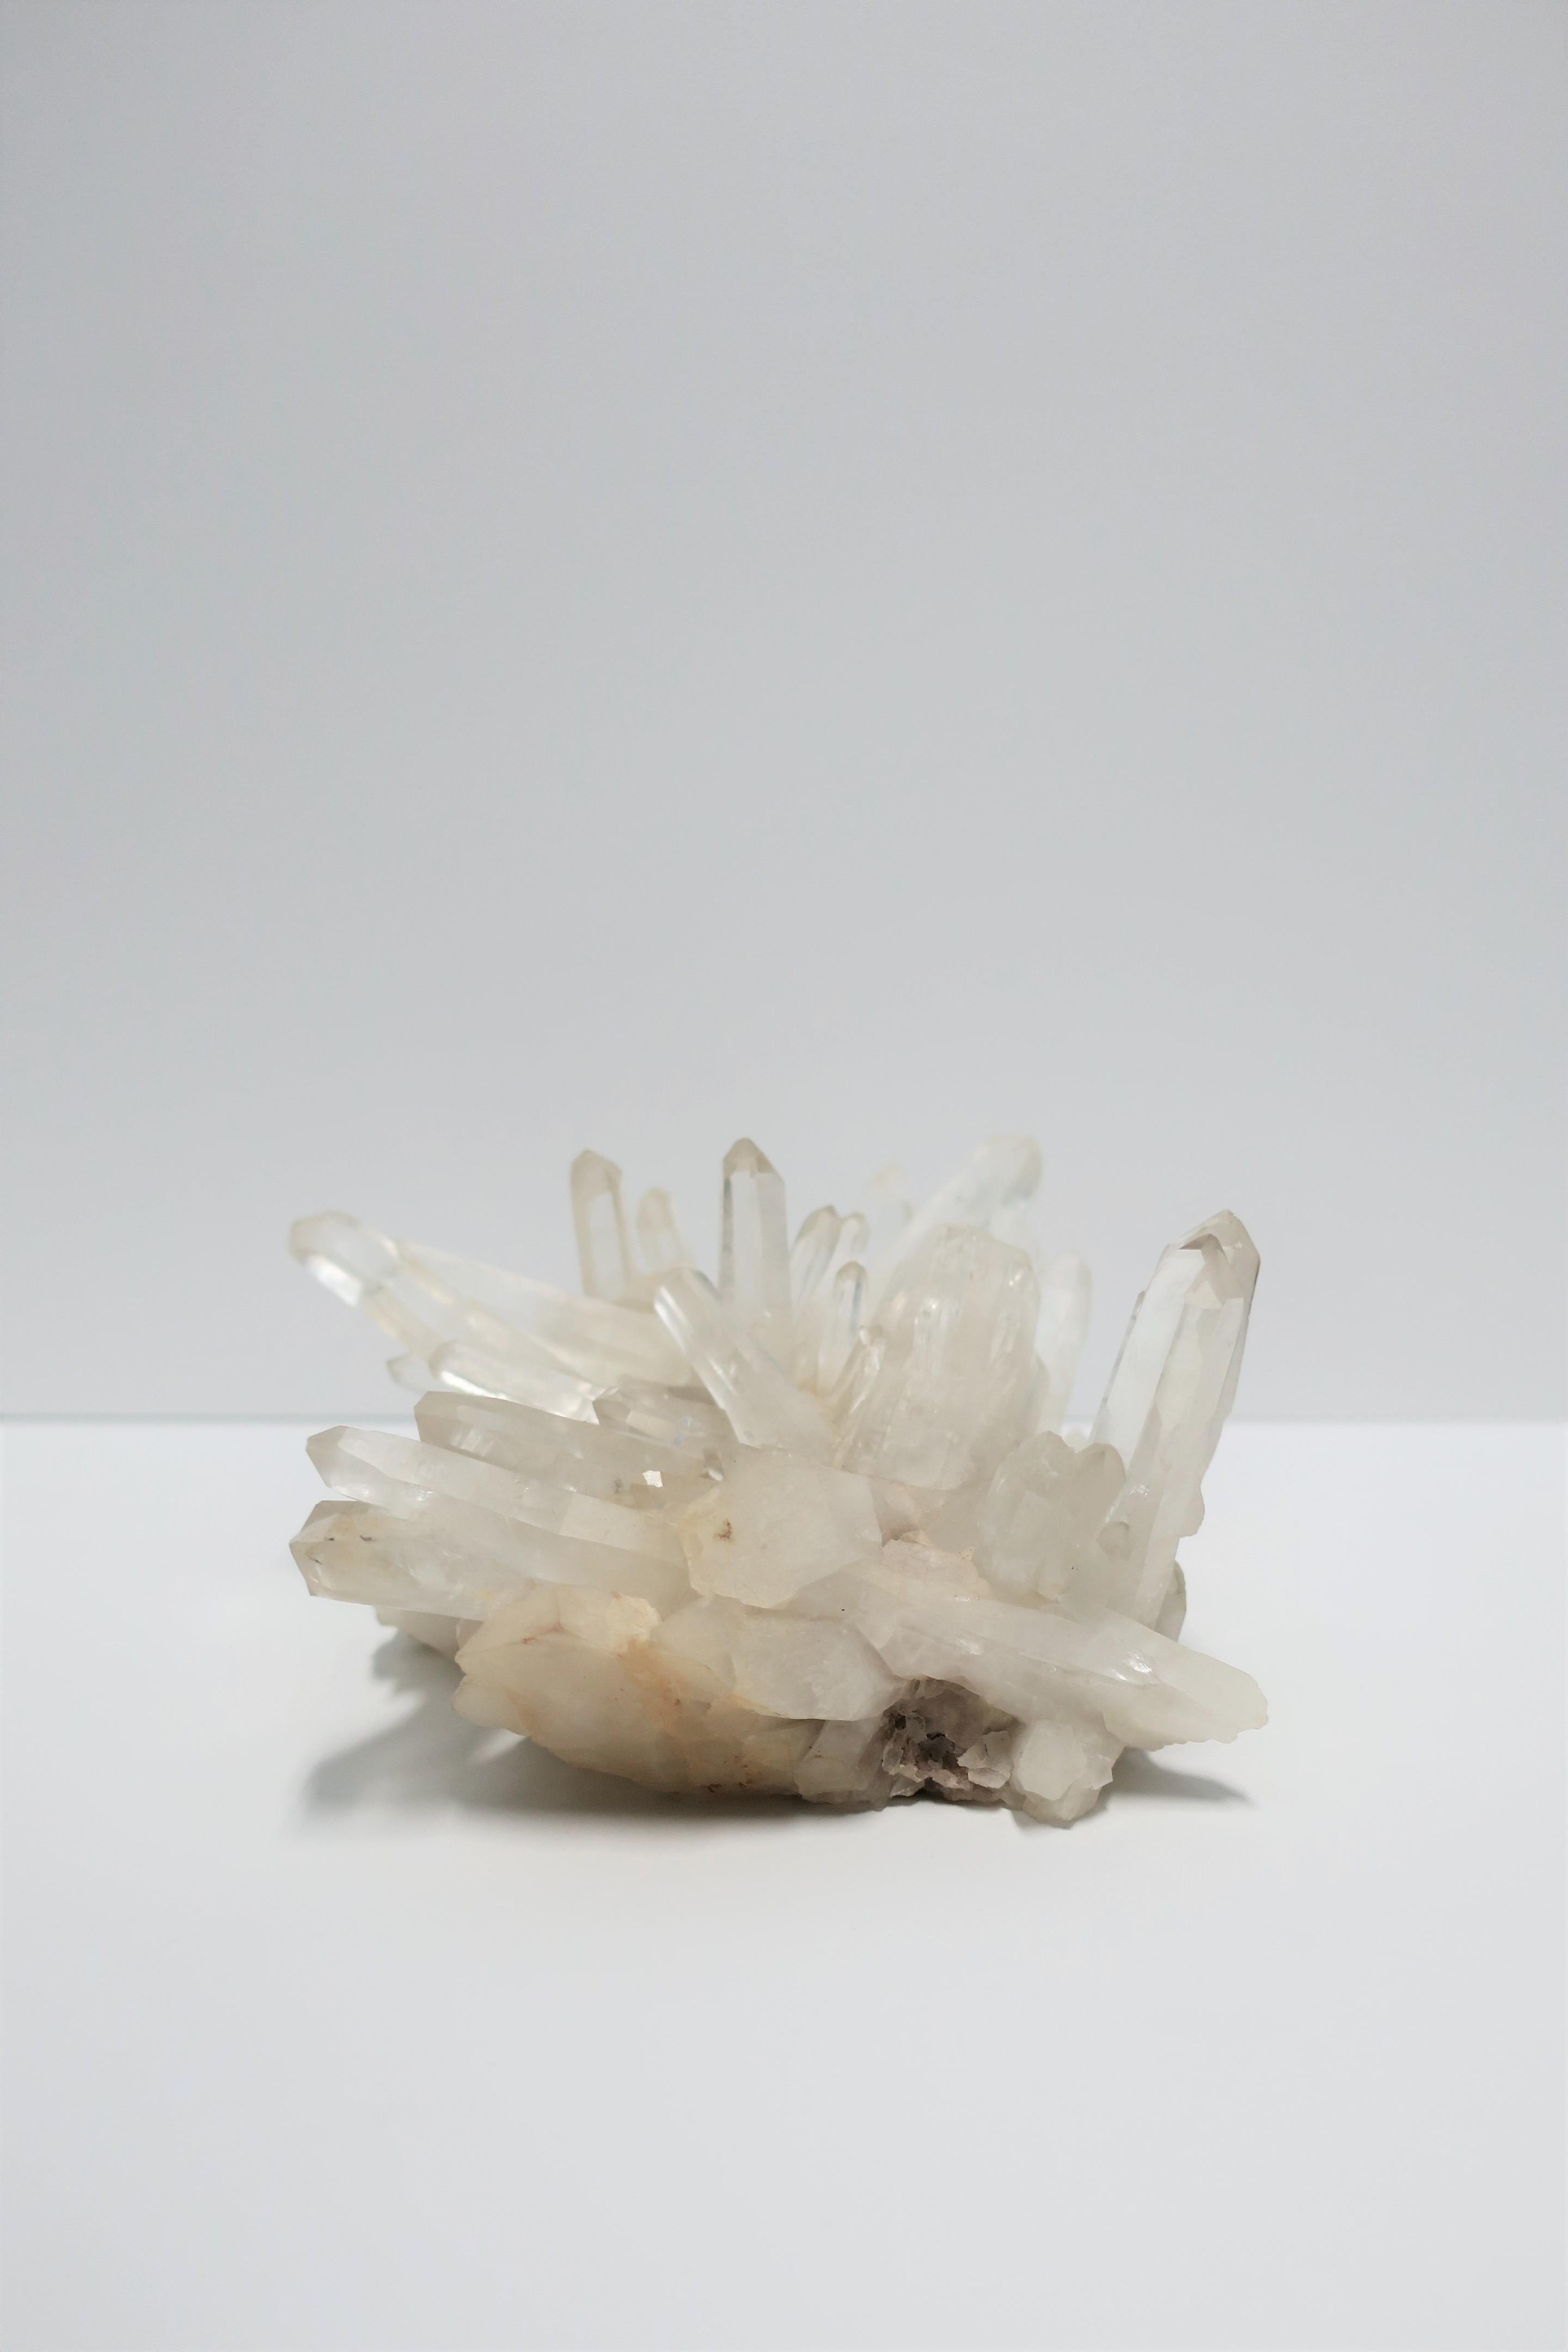 Unknown Natural Rock Crystal Piece